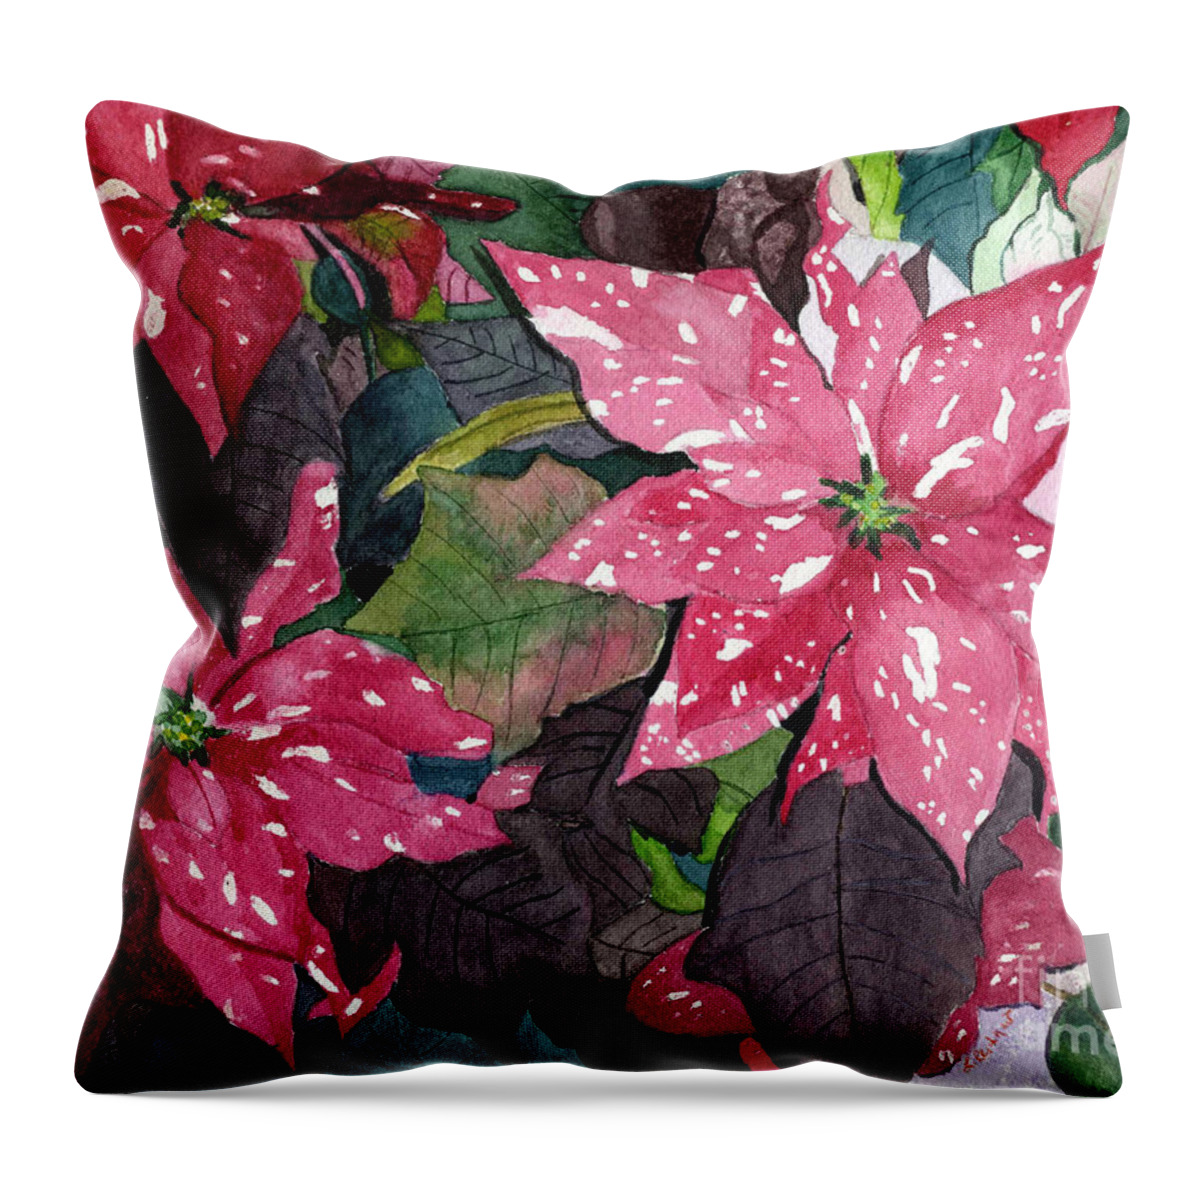 Watercolor Throw Pillow featuring the painting Christmas Beauty by Lynne Reichhart